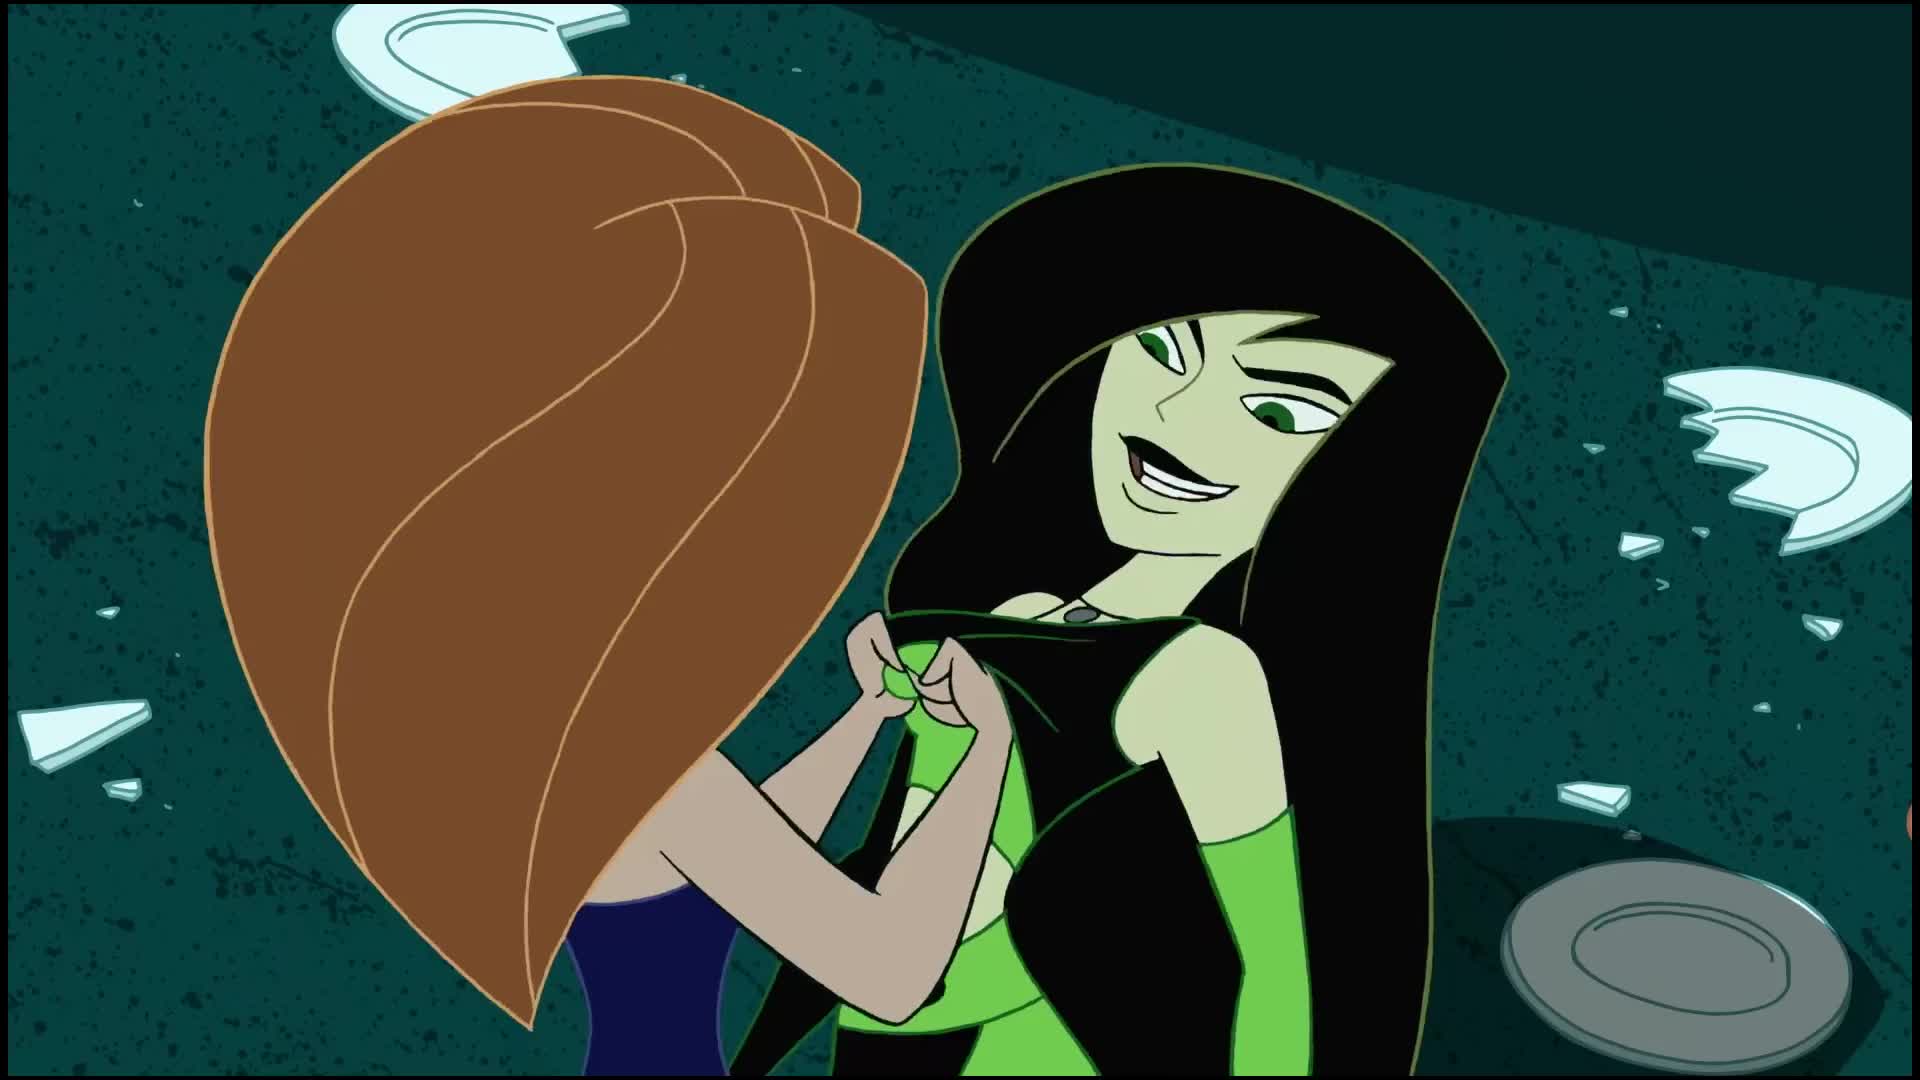 Kim Possible cosplay brings back iconic childhood crush with chic Shego -  Dexerto